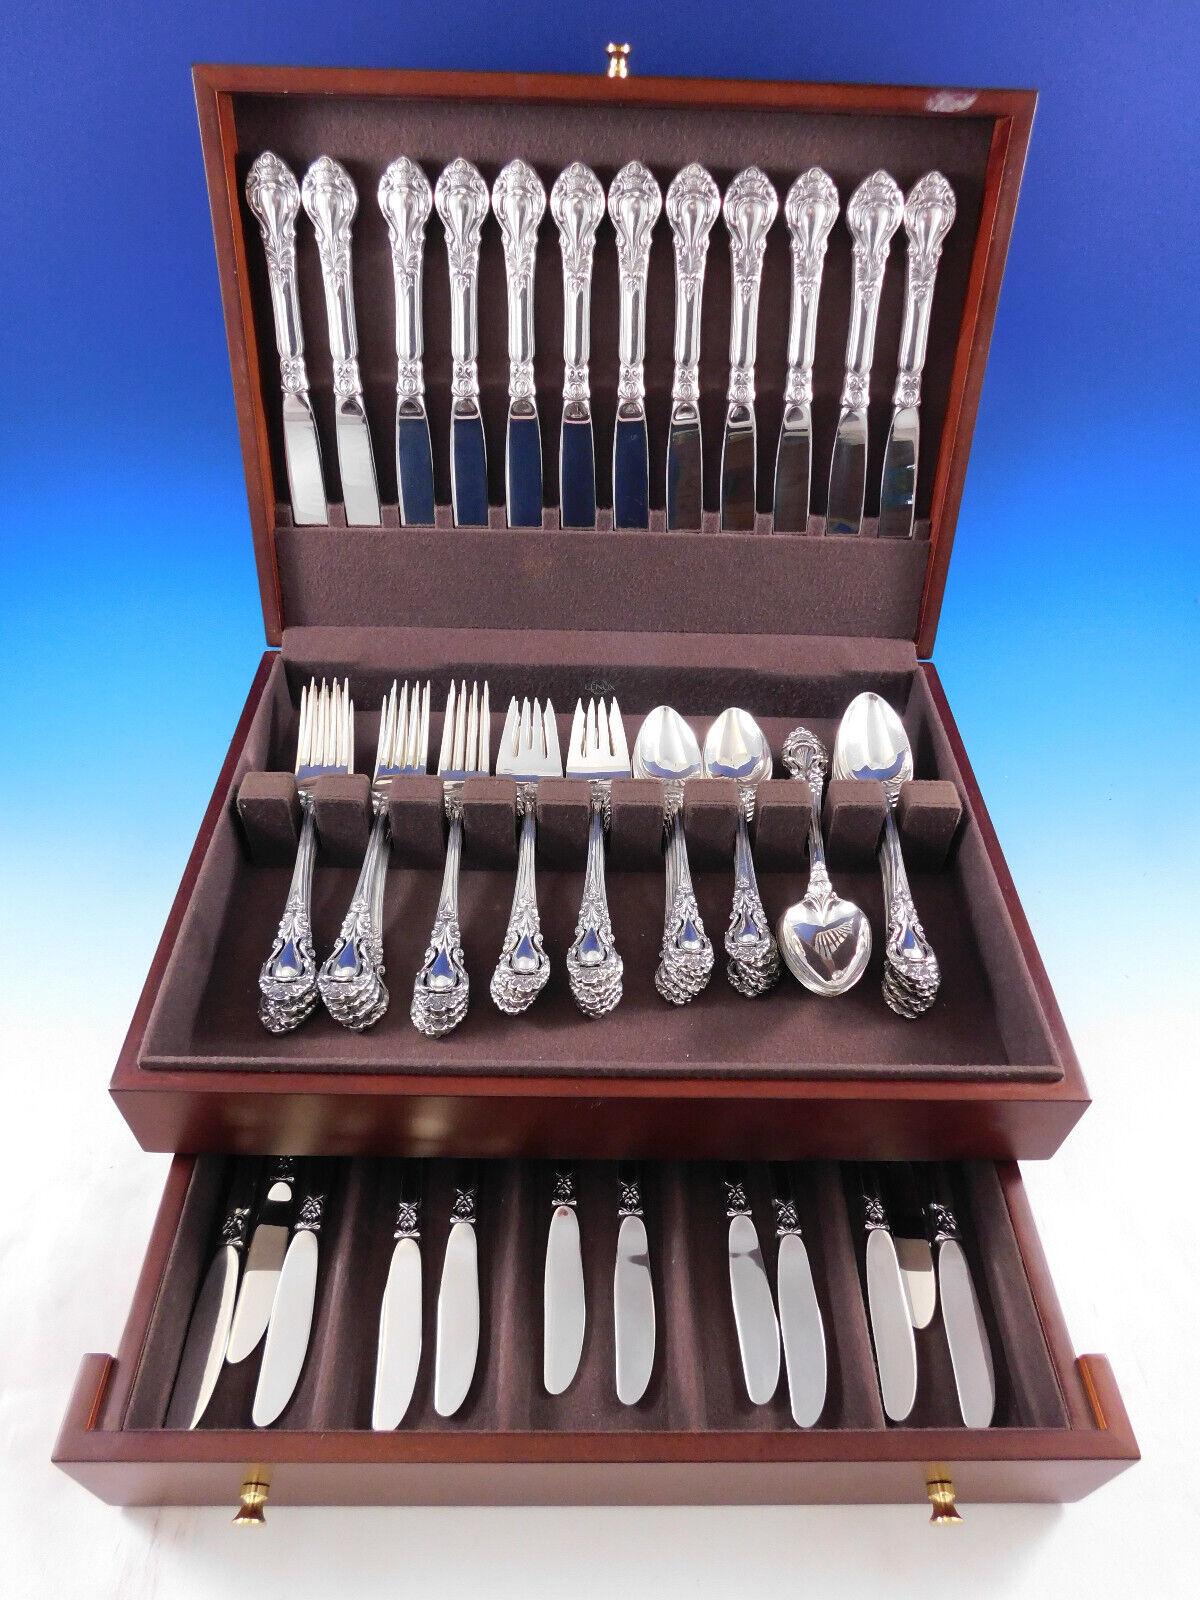 Royal Dynasty by Kirk - Stieff sterling silver flatware set, 72 pieces. This regal pattern is heavy and features a pierced handle. This set includes:

12 Place Knives, 9 1/8